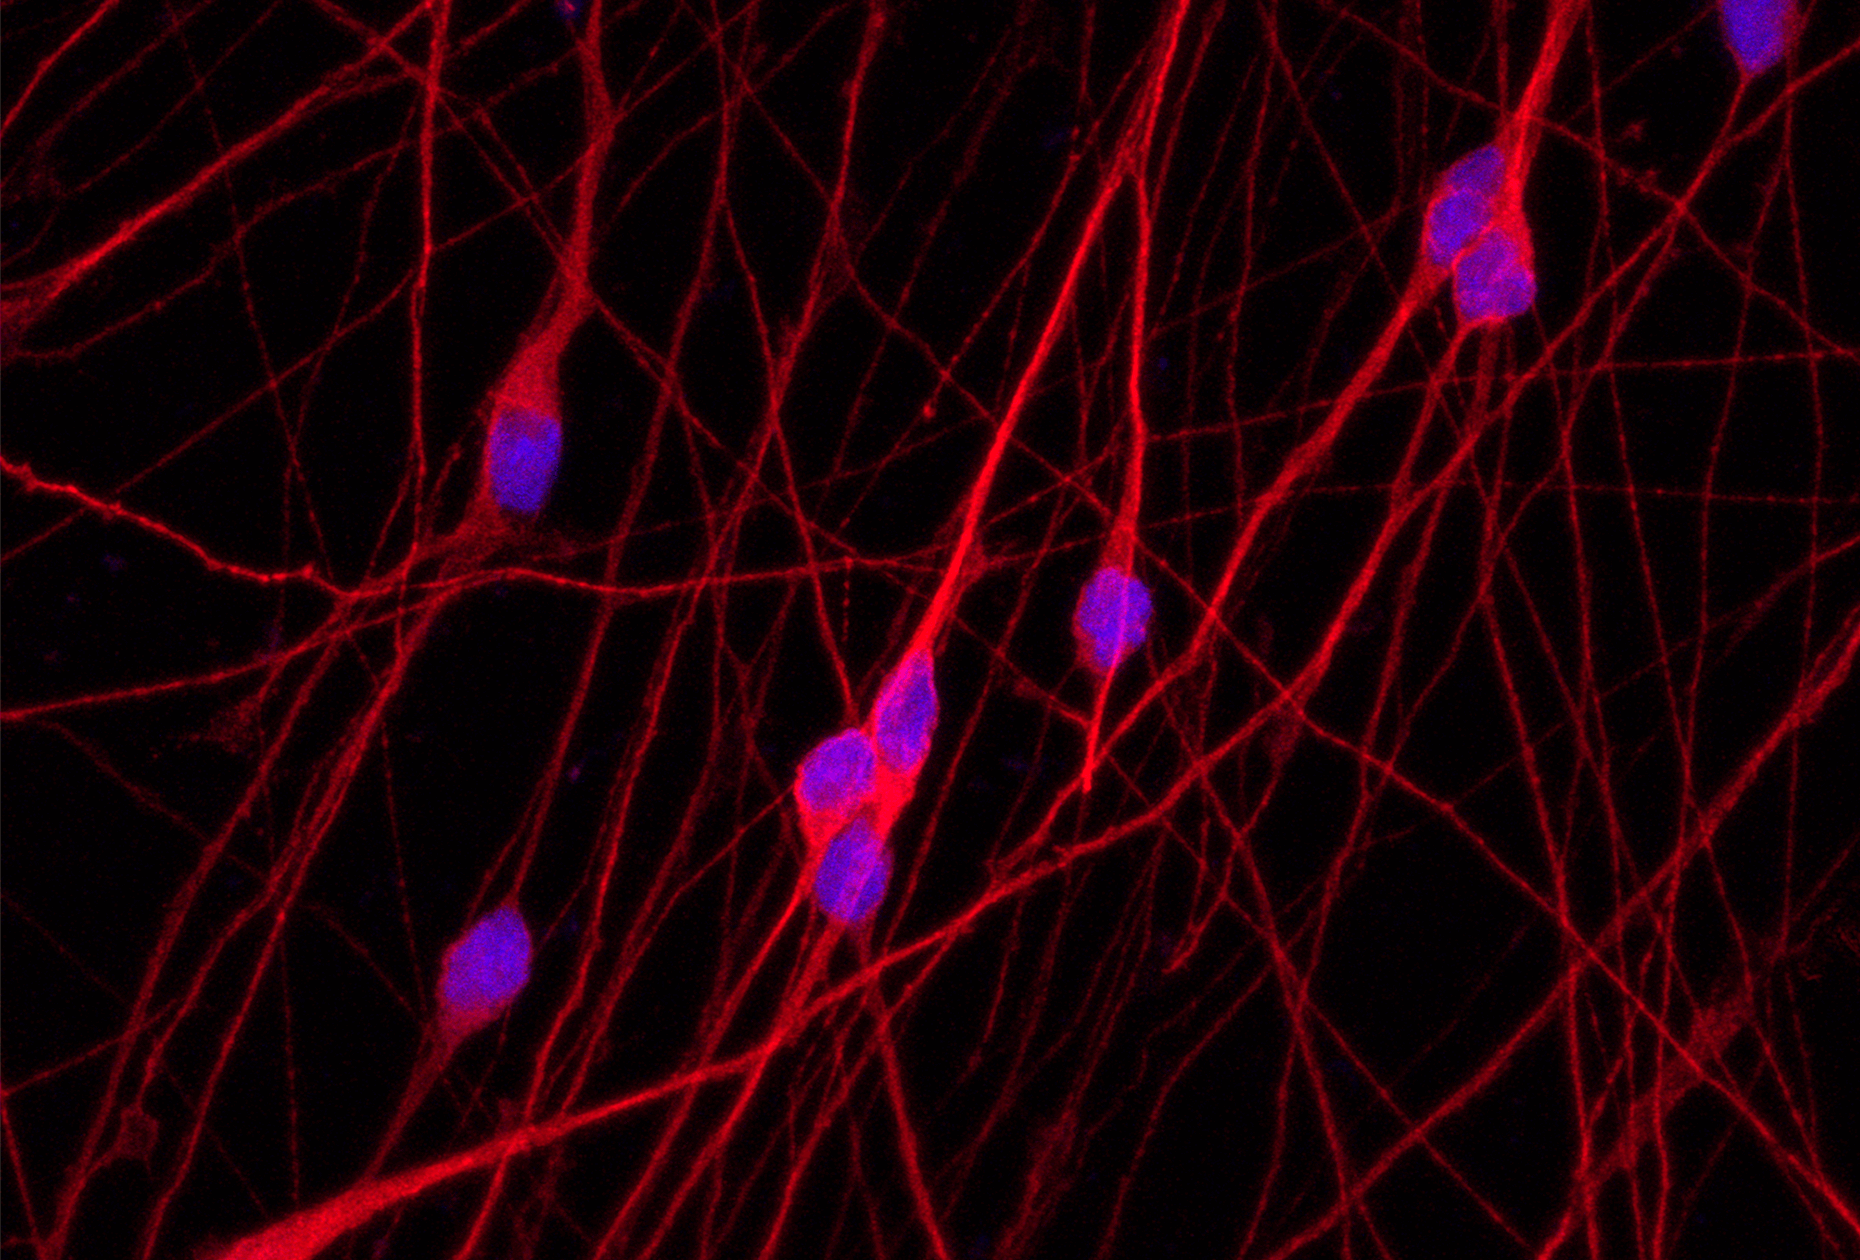 Cell culture hacks for ioGlutamatergic Neurons